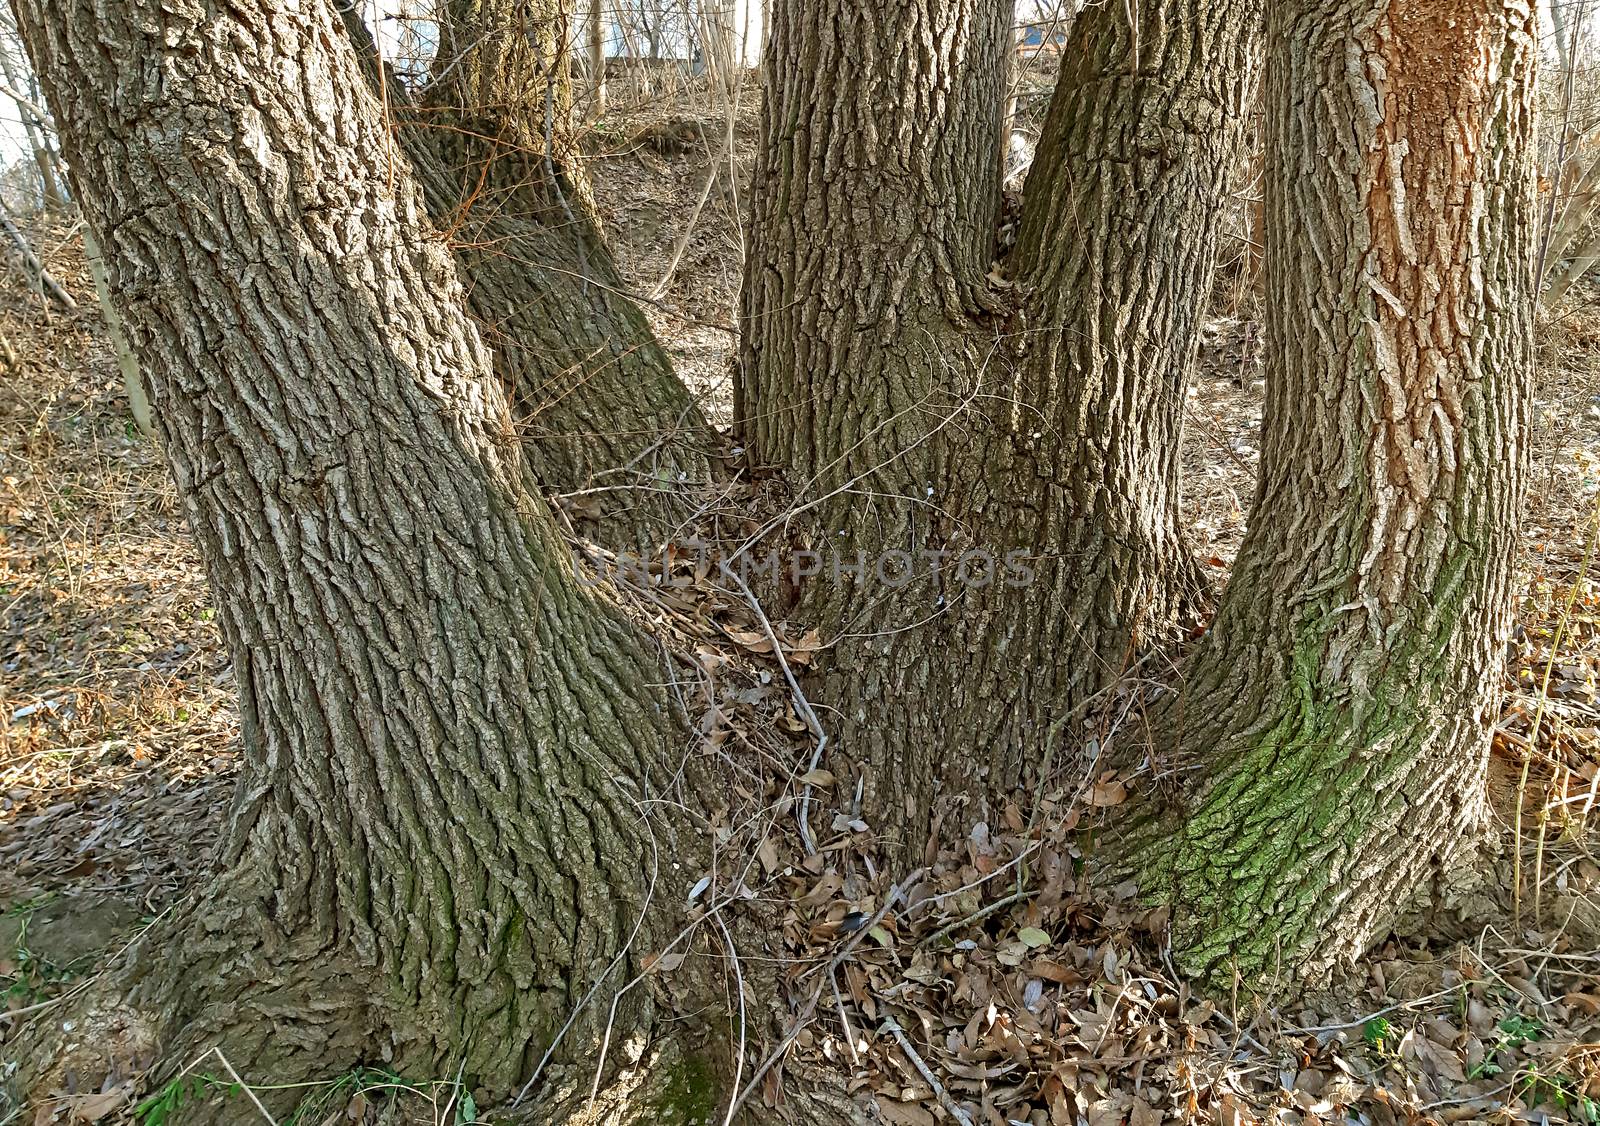 Old elm tree, it has many stems and it's thick.